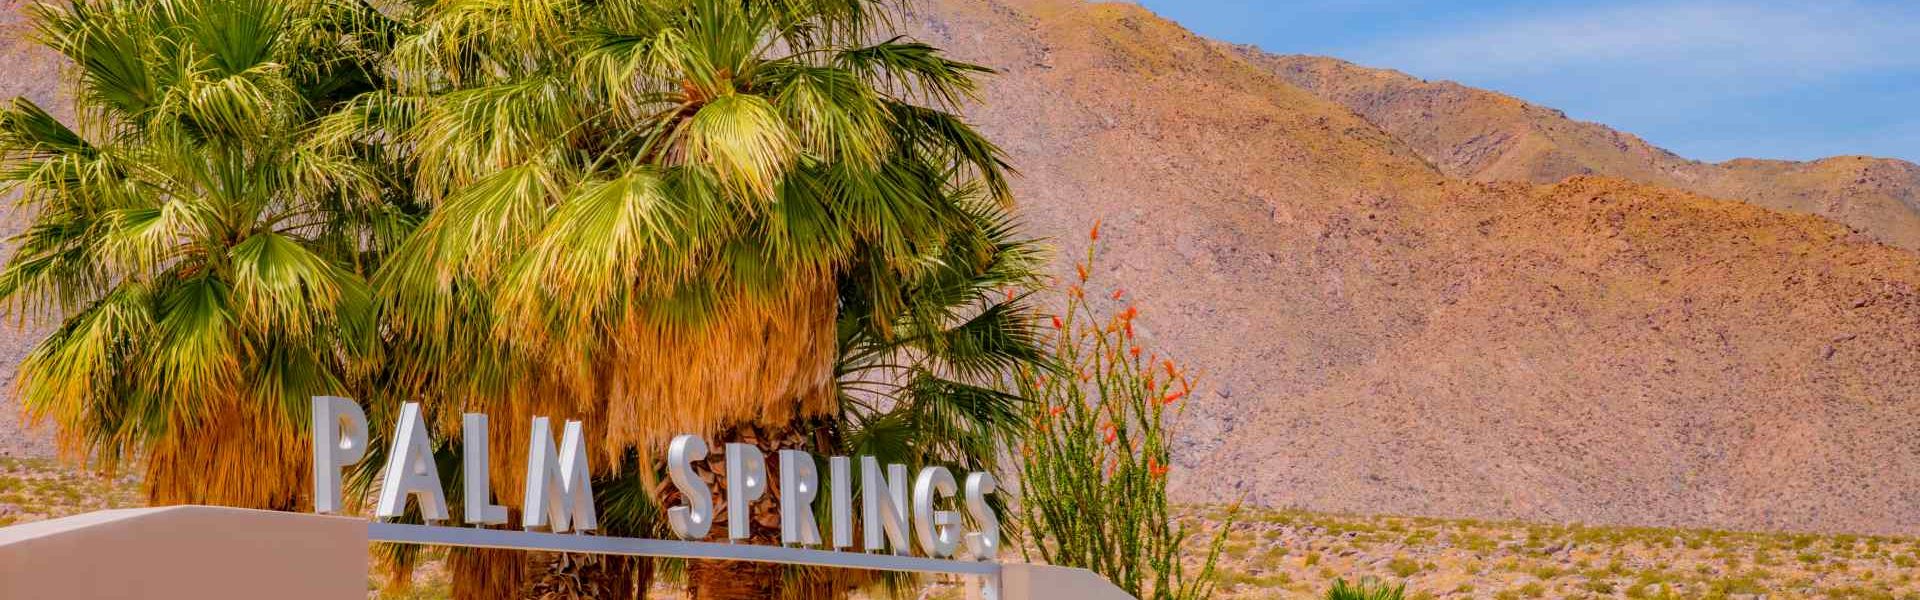 hotels by gay bars palm springs california